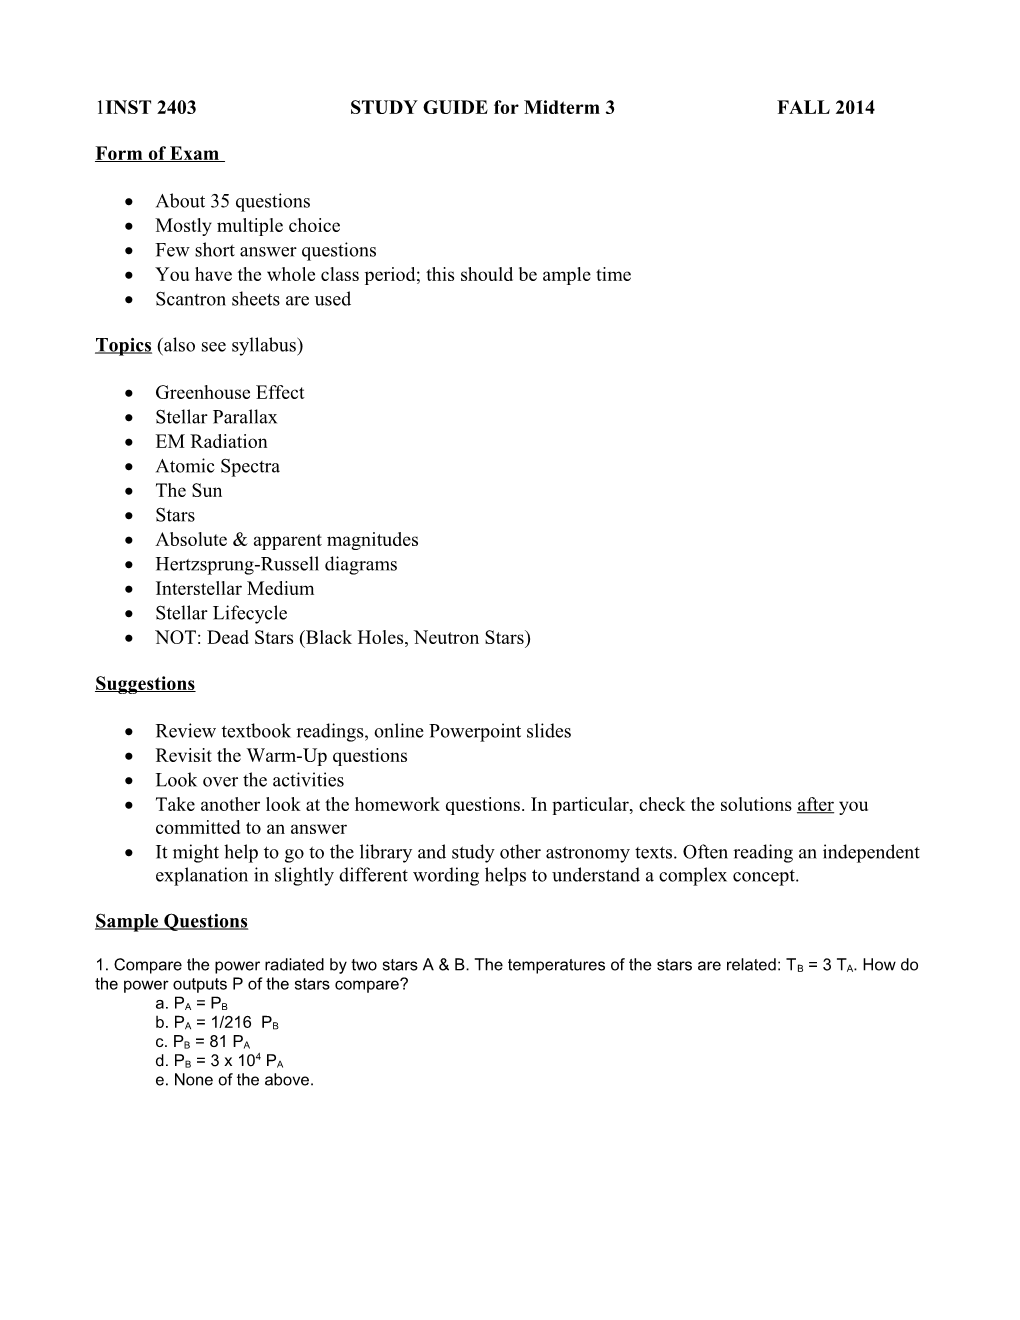 INST 2403STUDY GUIDE for Midterm 3FALL 2014